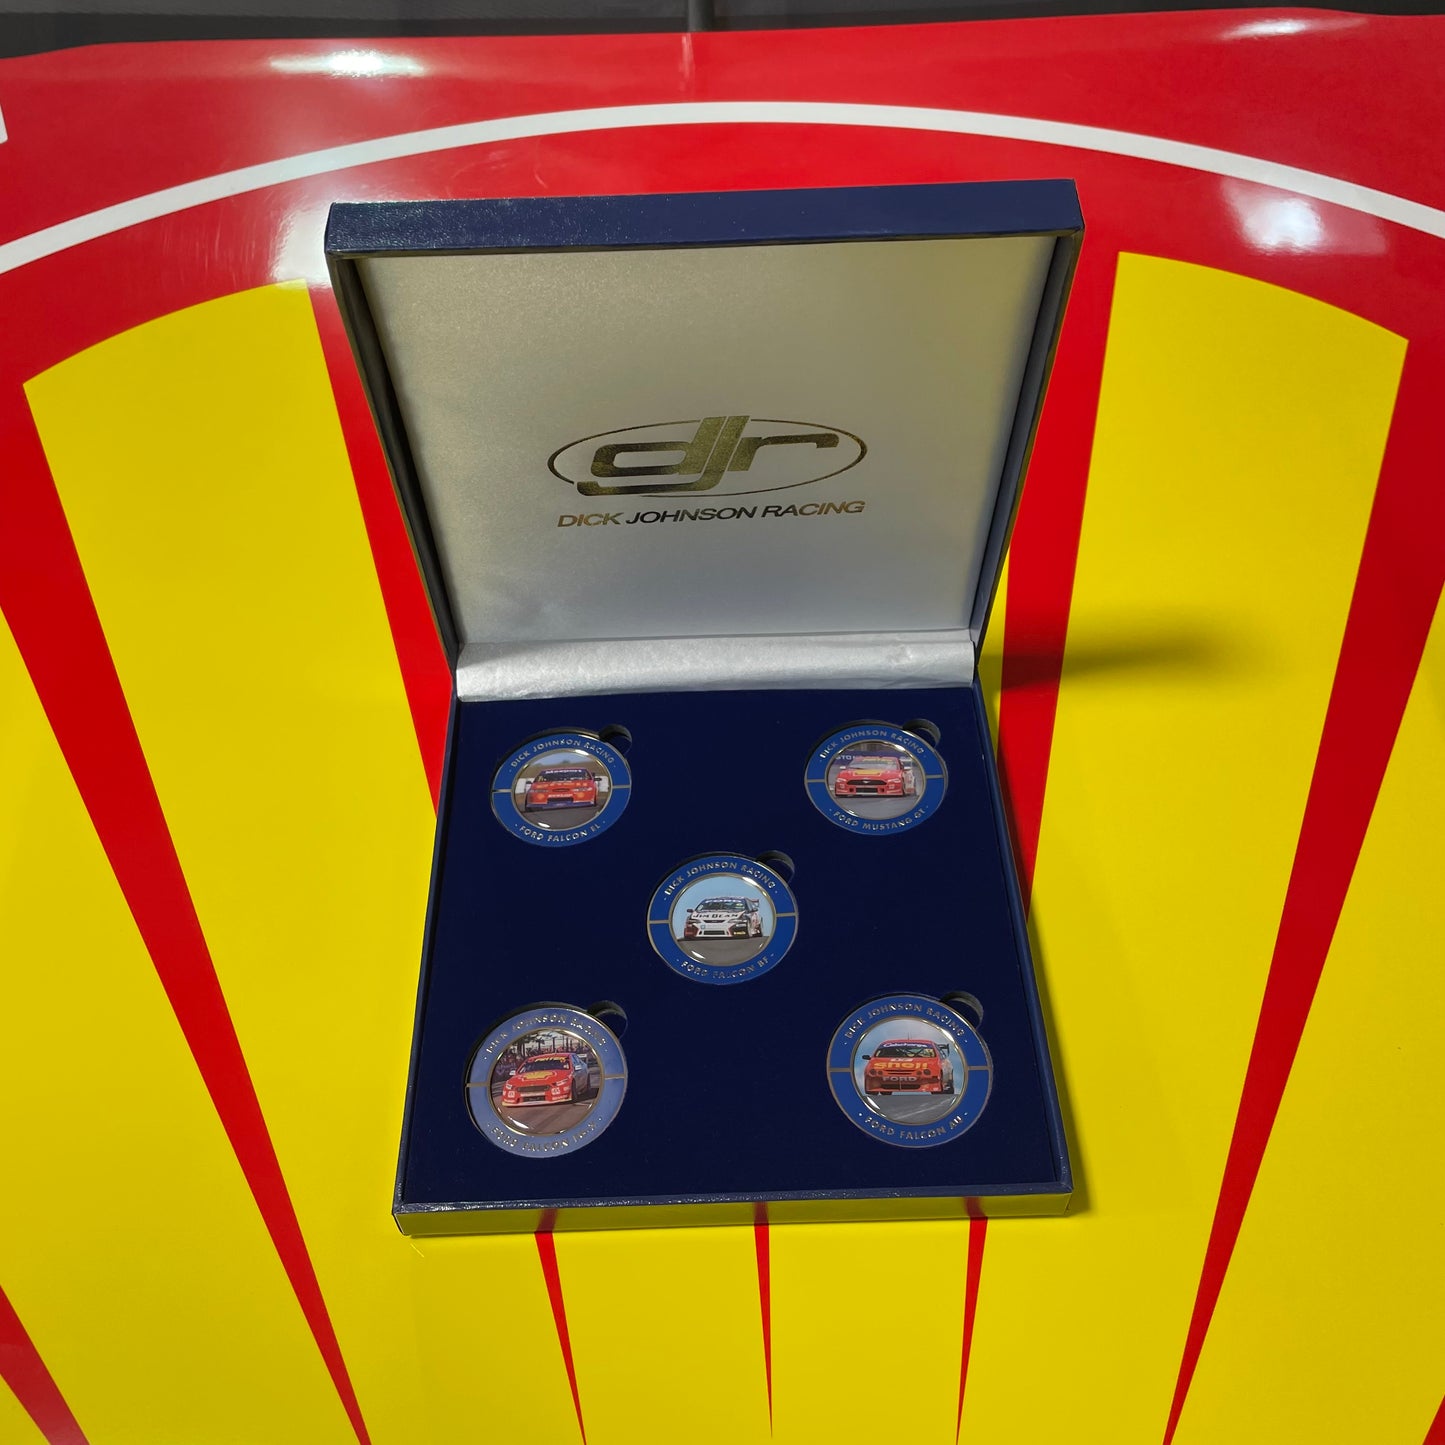 DJR - The Cars Collection Medallion Set